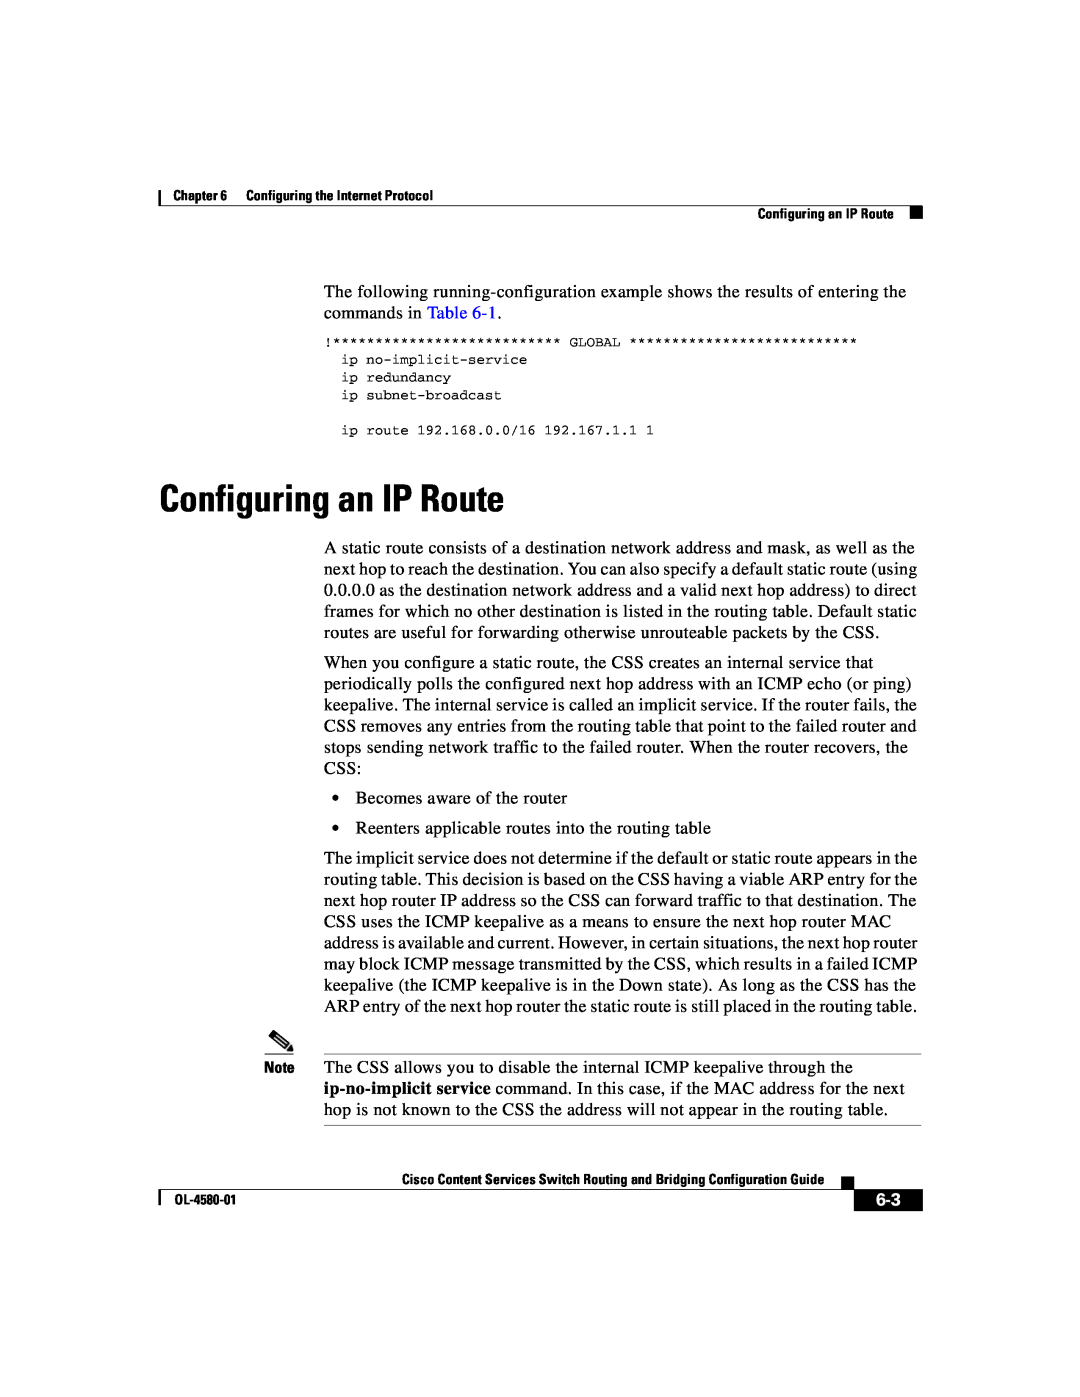 Cisco Systems OL-4580-01 manual Configuring an IP Route, ip no-implicit-service ip redundancy 